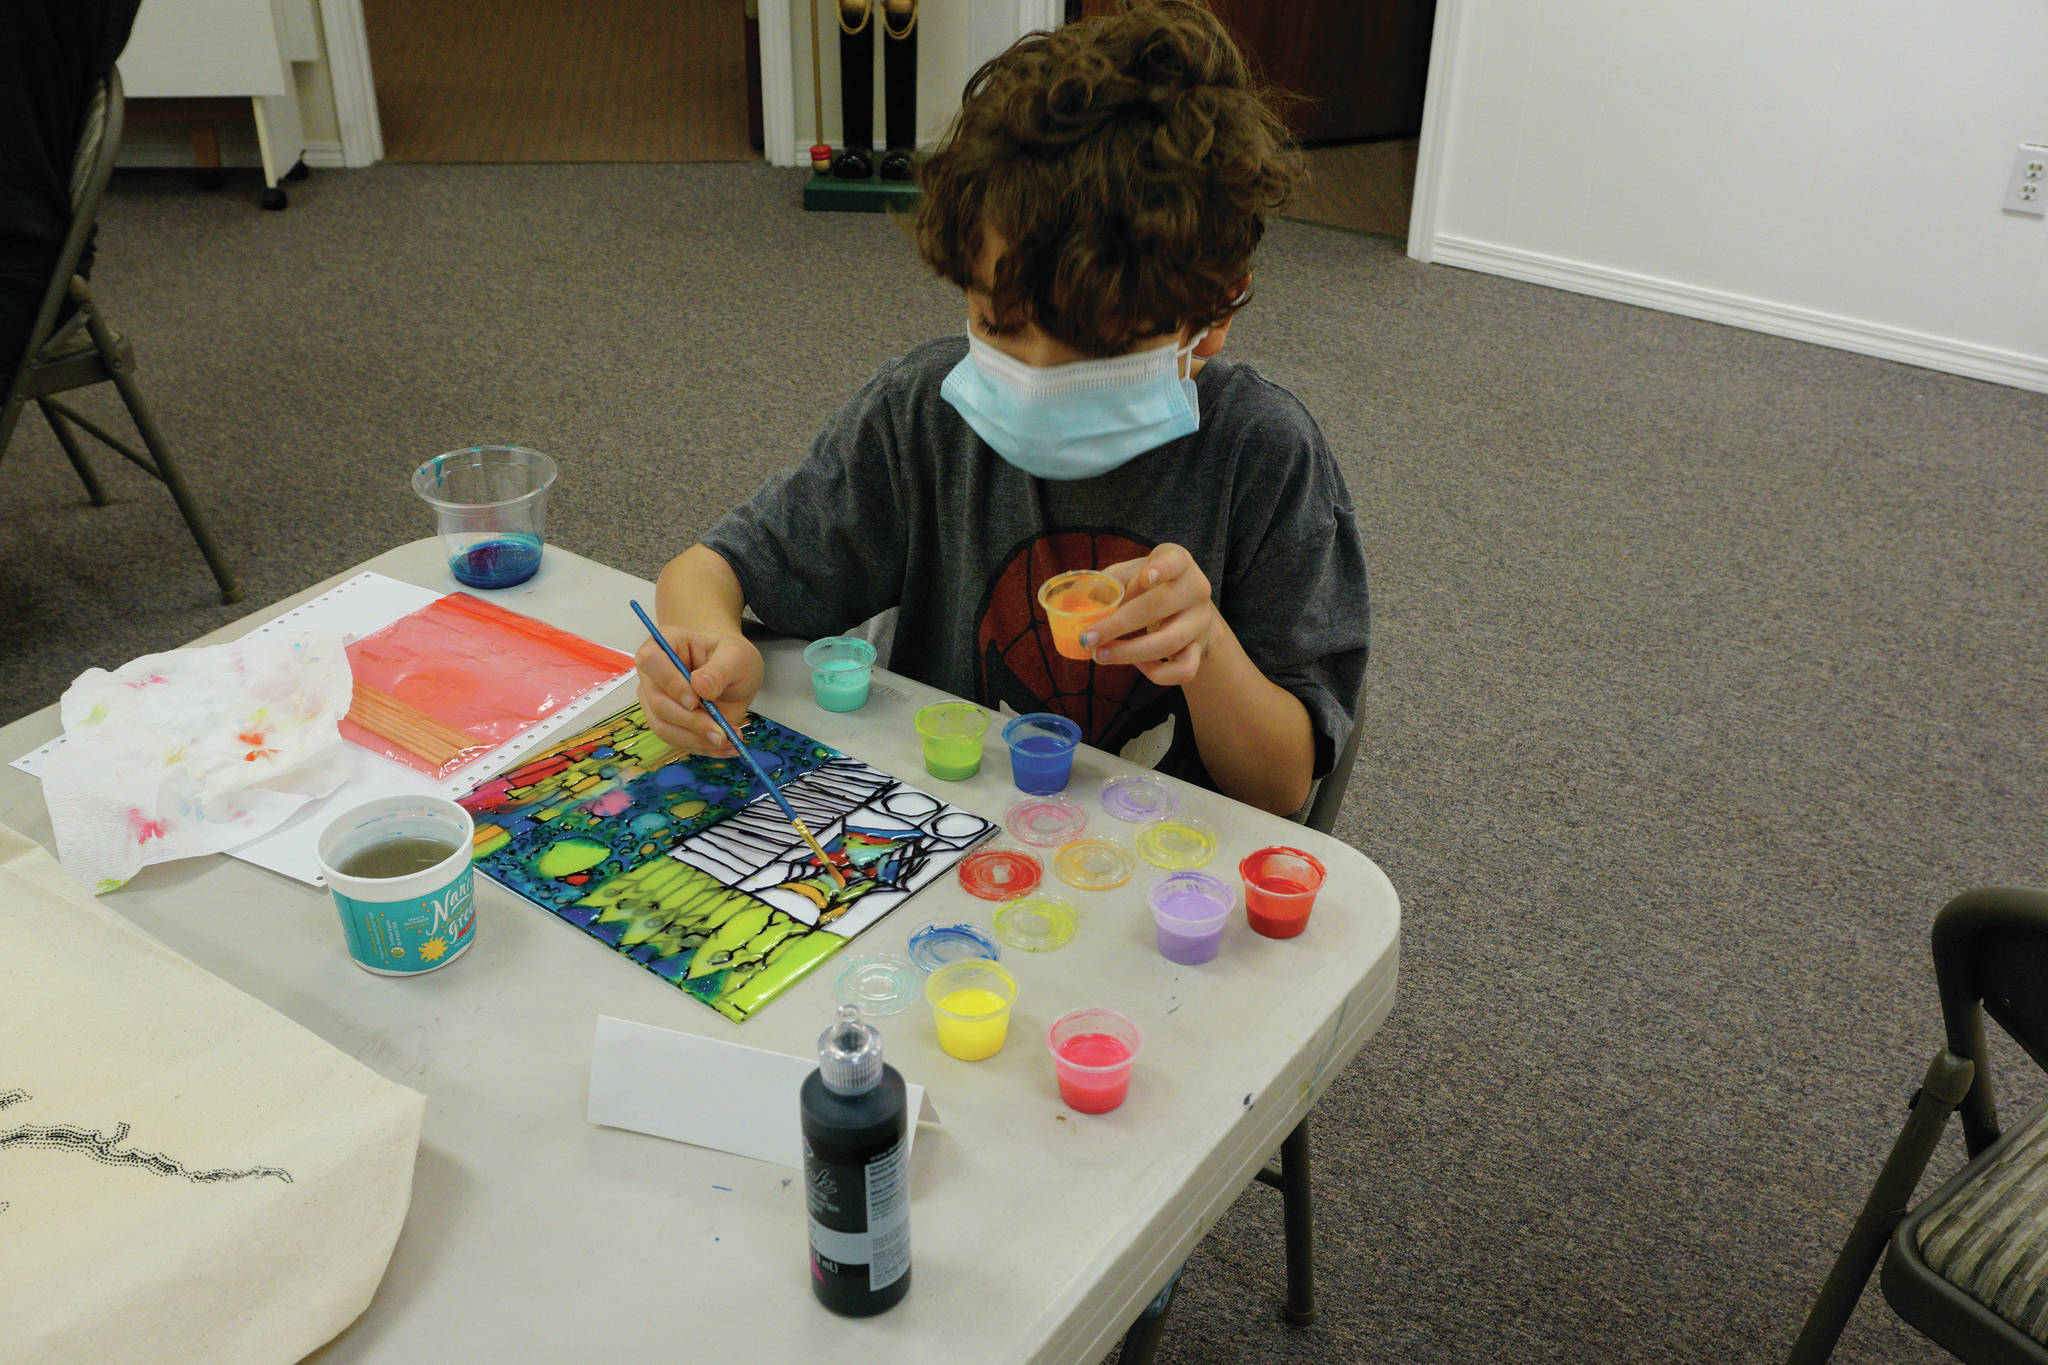 Ryder Chase, age 9, works on faux stained glass in Amy Komar’s socially-distant Art a la Carte class on Friday, Nov. 20, 2020, at the Homer Council on the Arts. Children in the class wore masks and worked at either end of long tables spaced apart. The stars will be placed in store windows “for a dose of color therapy for the community,” Komar said. (Photo by Michael Armstrong/Homer News)